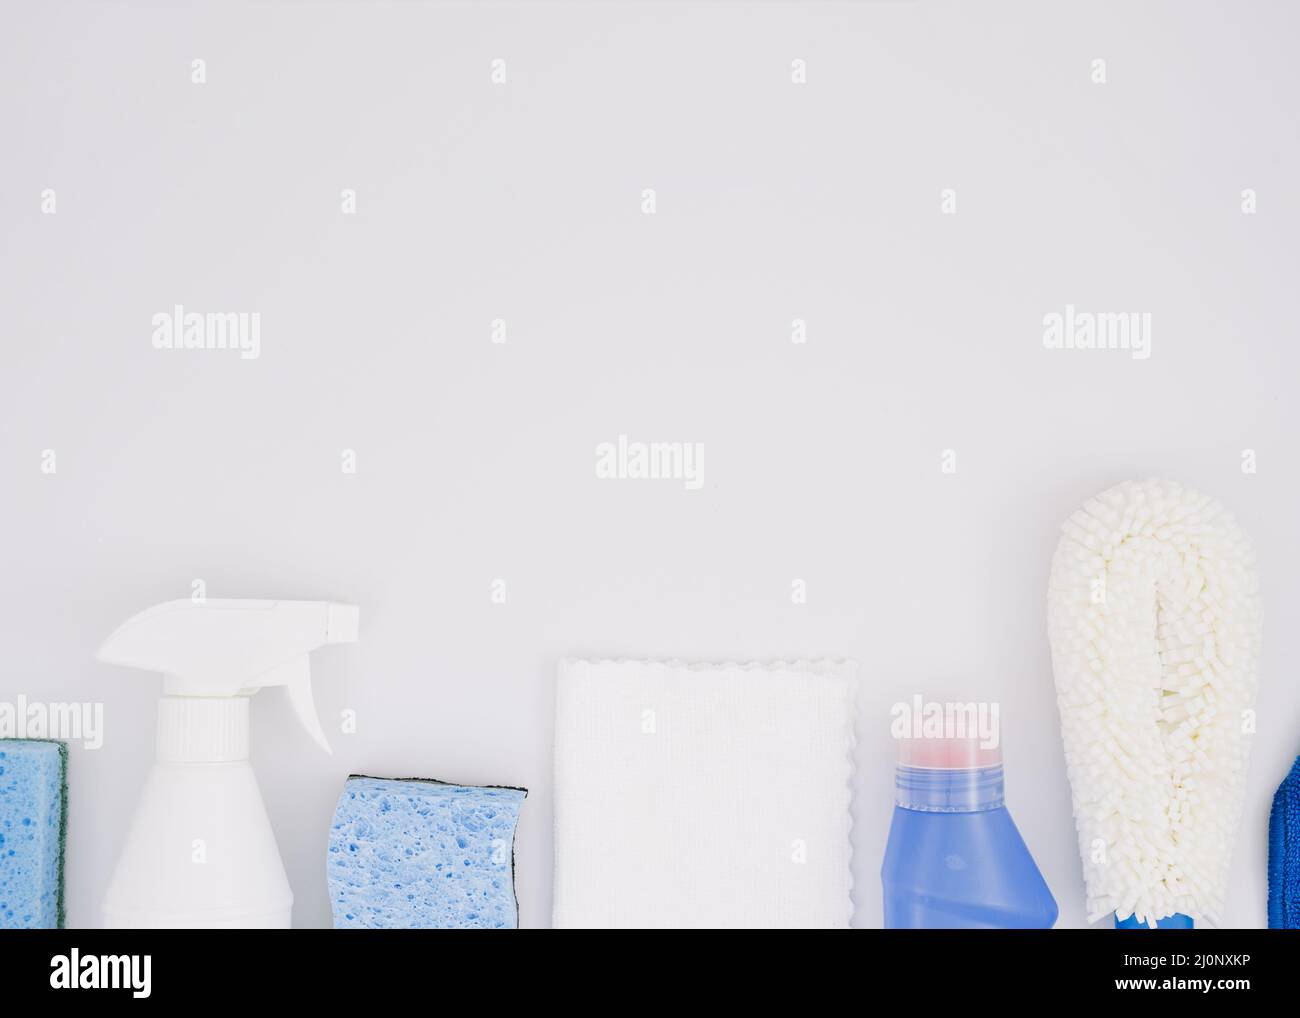 Bathroom with Cleaning Supplies Stock Image - Image of impurities, cleaner:  28044919